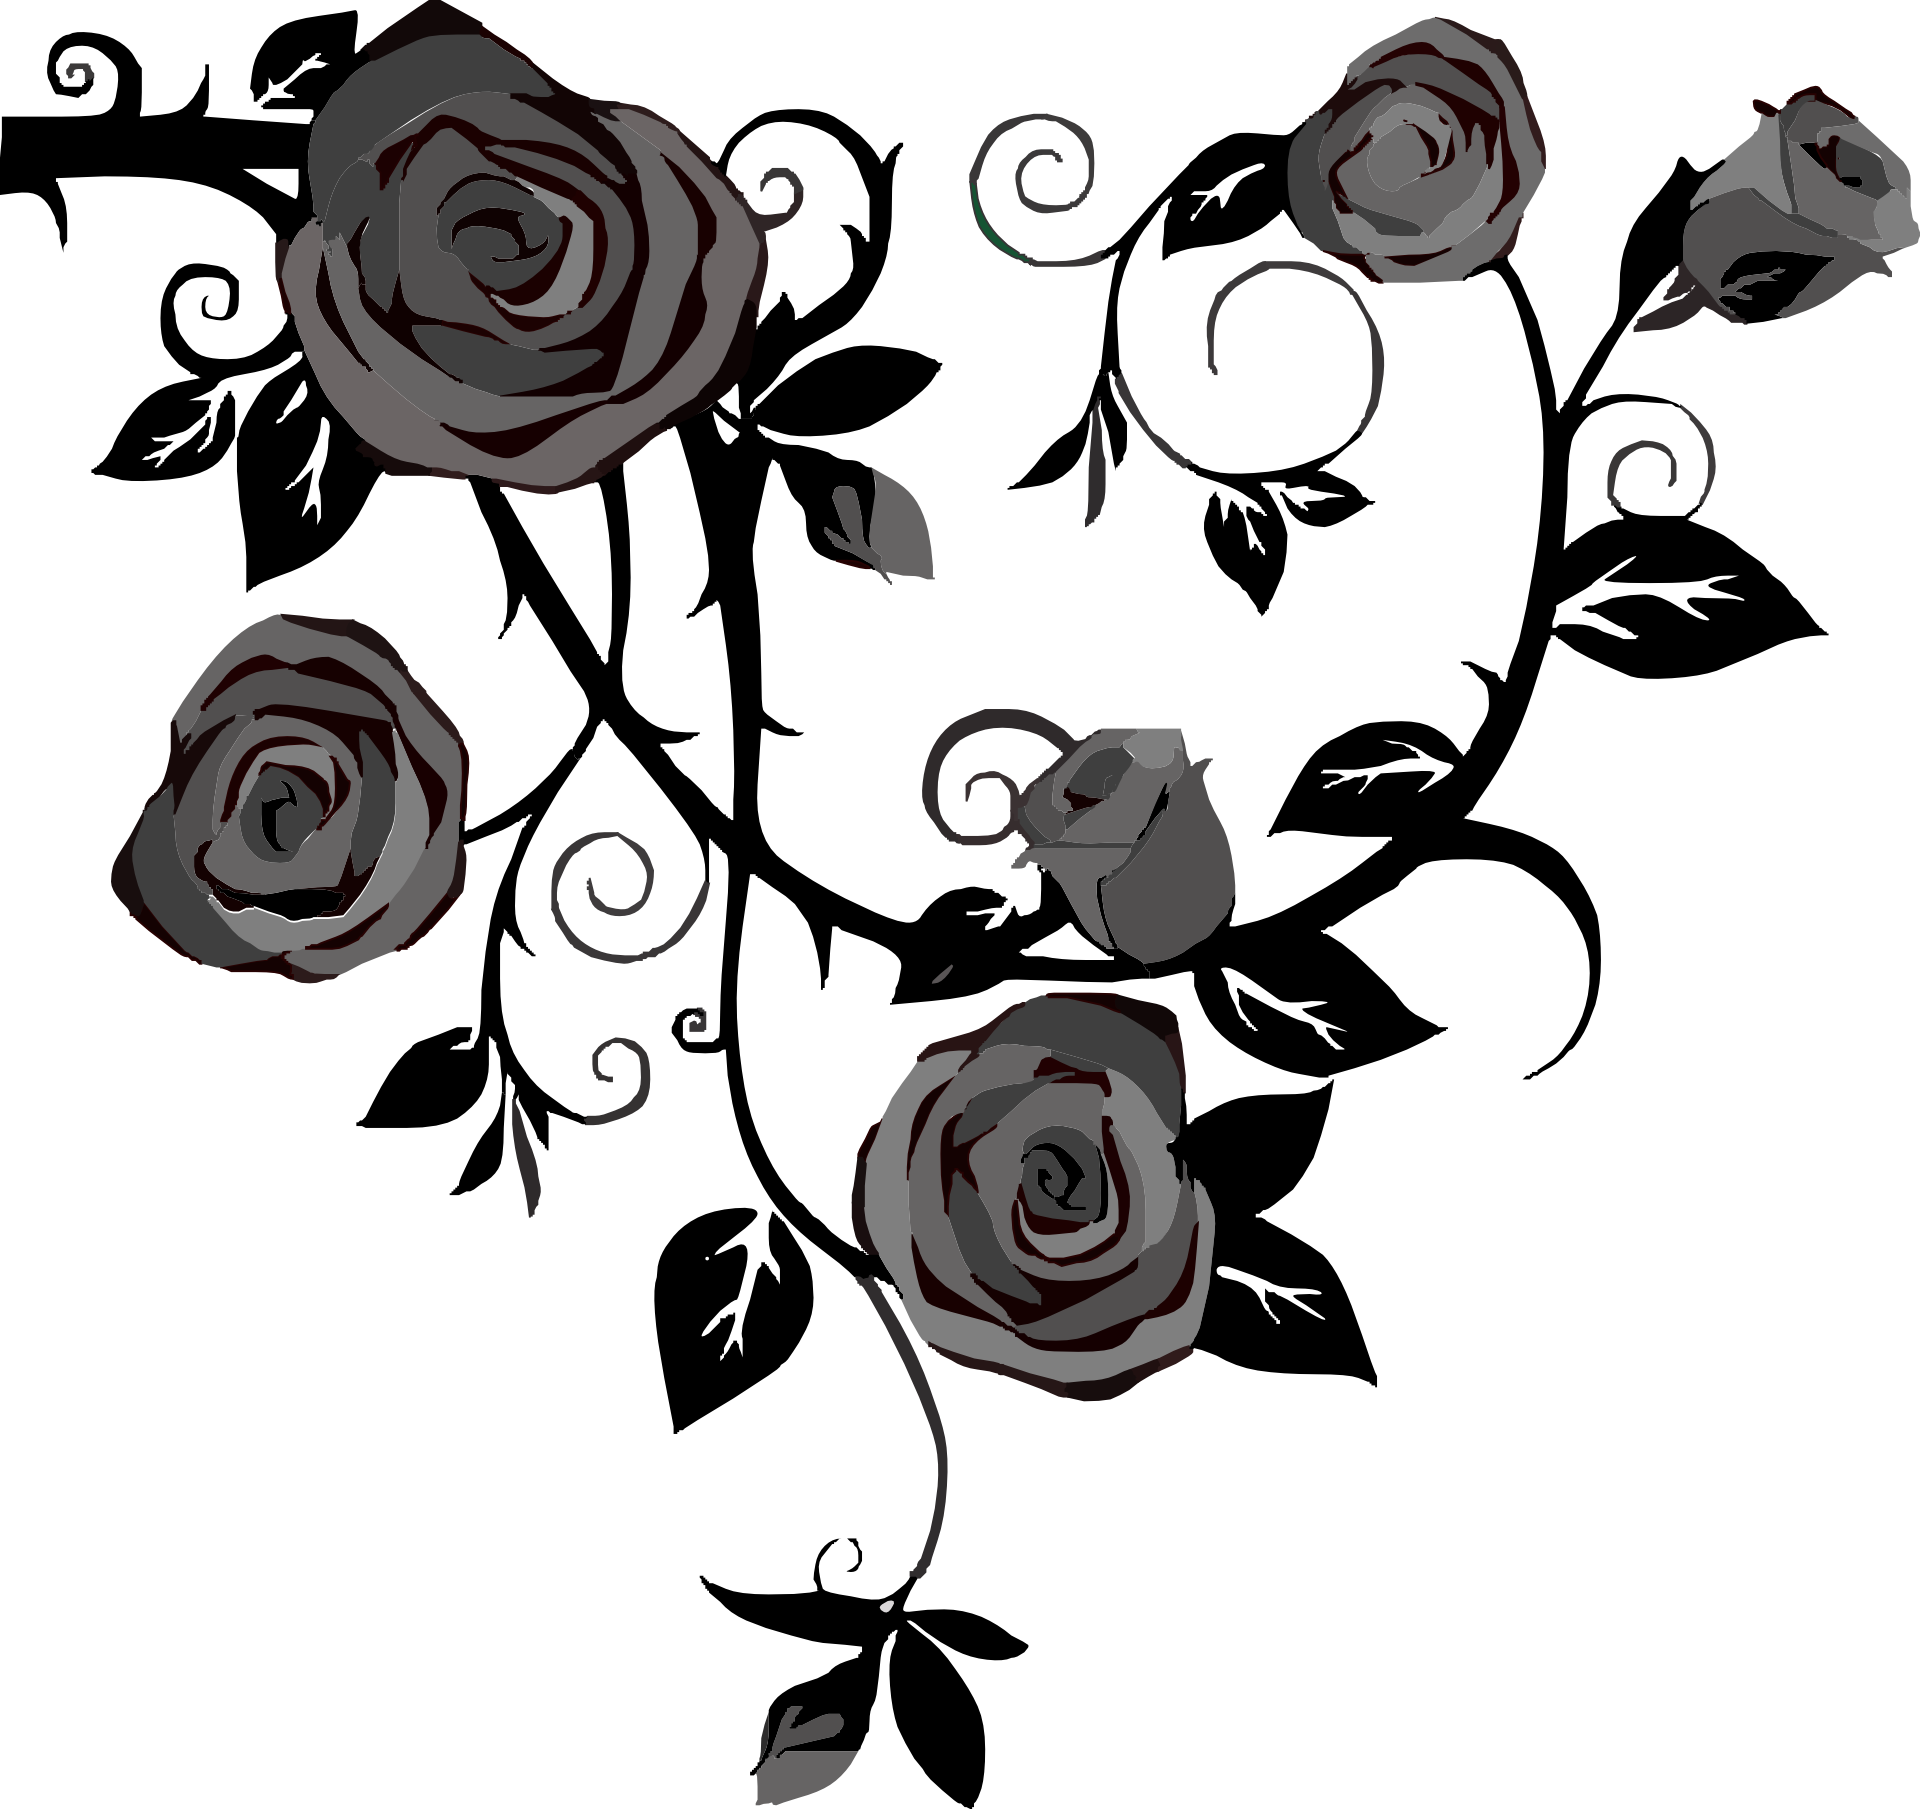 1920 X 1809 10 - Roses Art Black And White Clipart - Large Size Png Image.....